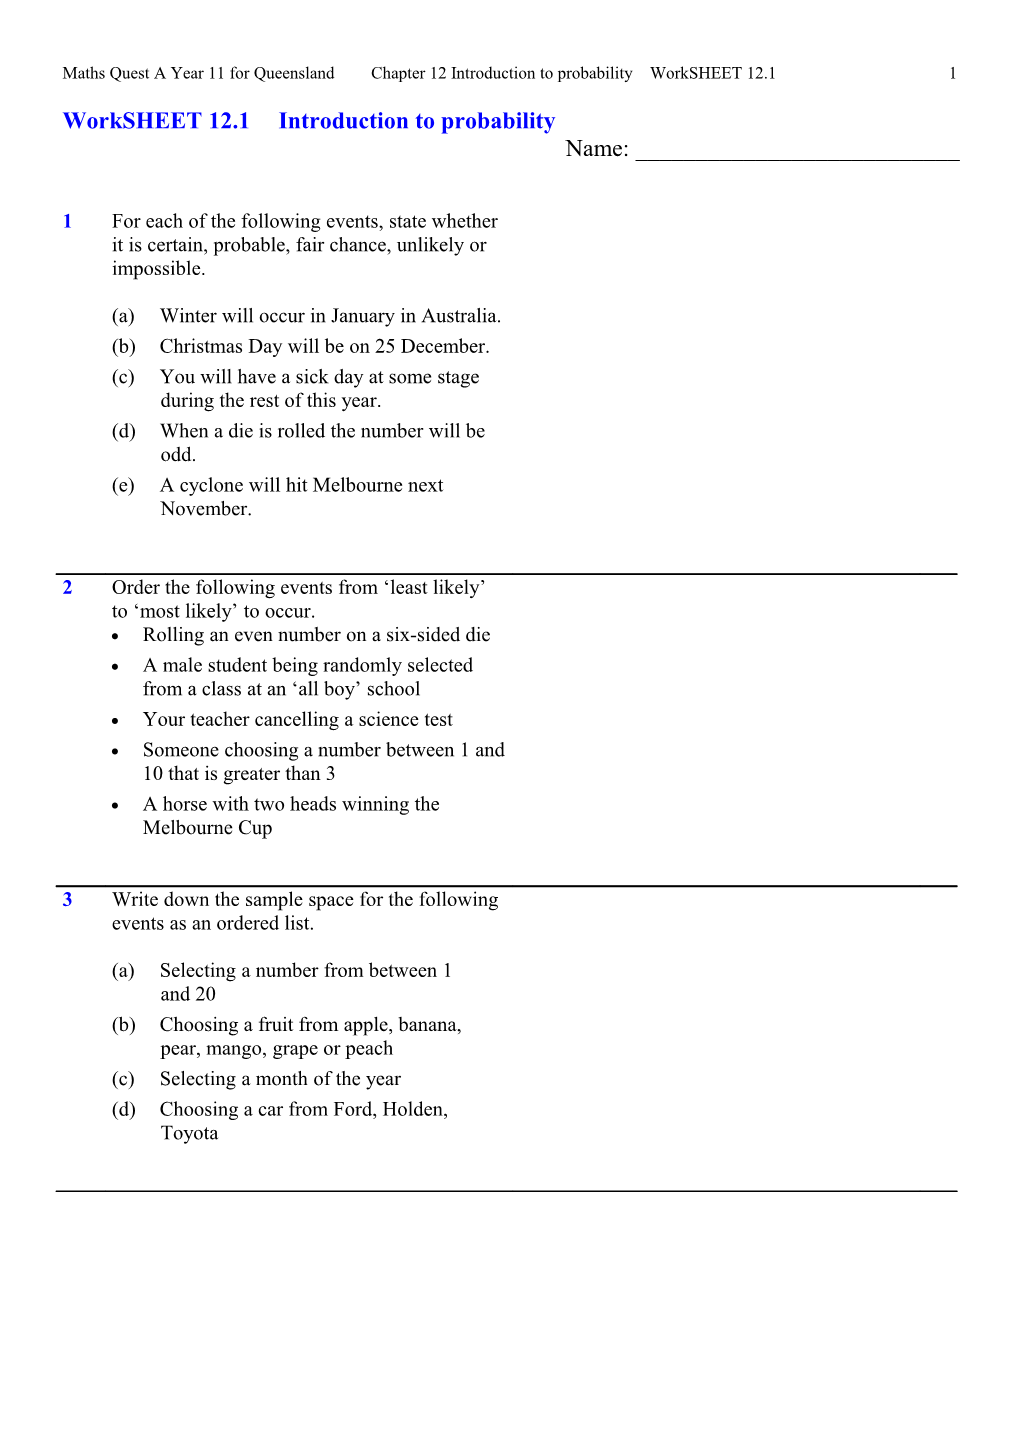 Maths Quest a Year 11 for Queenslandchapter 12 Introduction to Probability Worksheet 12.11